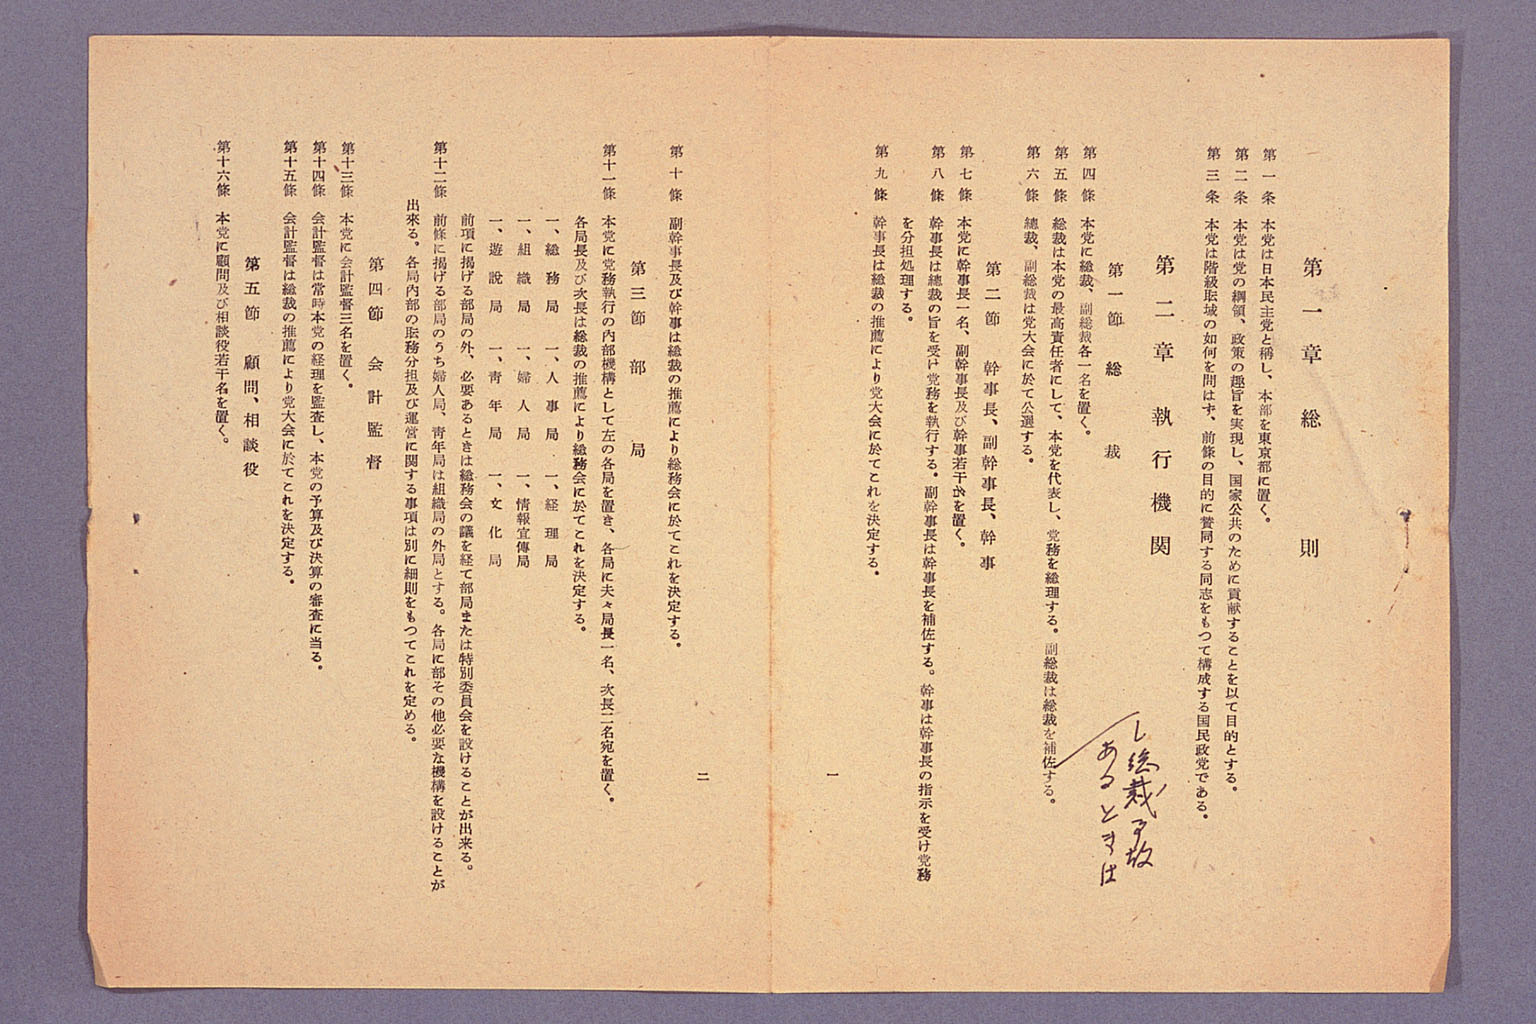 Party rules and codes for Japan Democratic Party (draft) (larger)